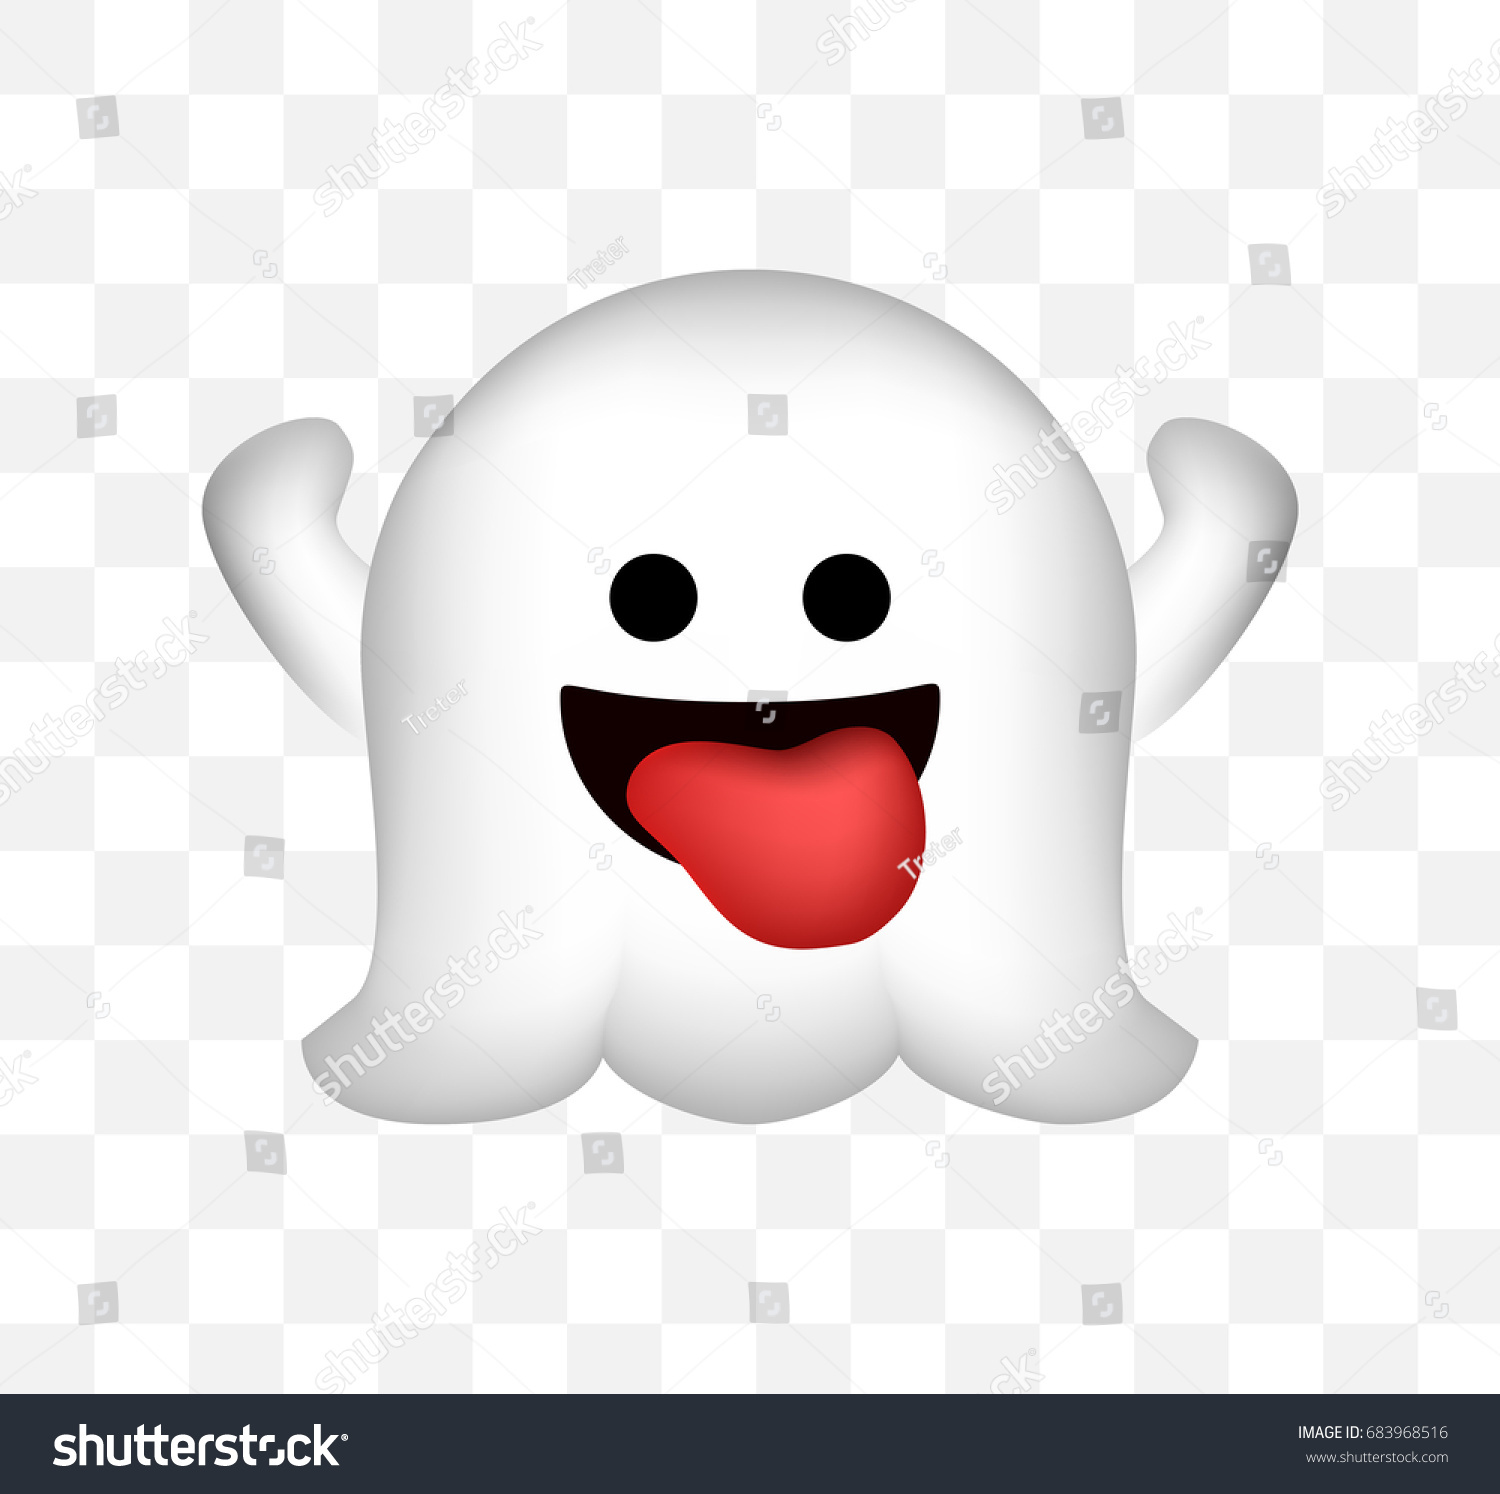 Cute Ghost Icon On Transparent Background Stock Vector ...